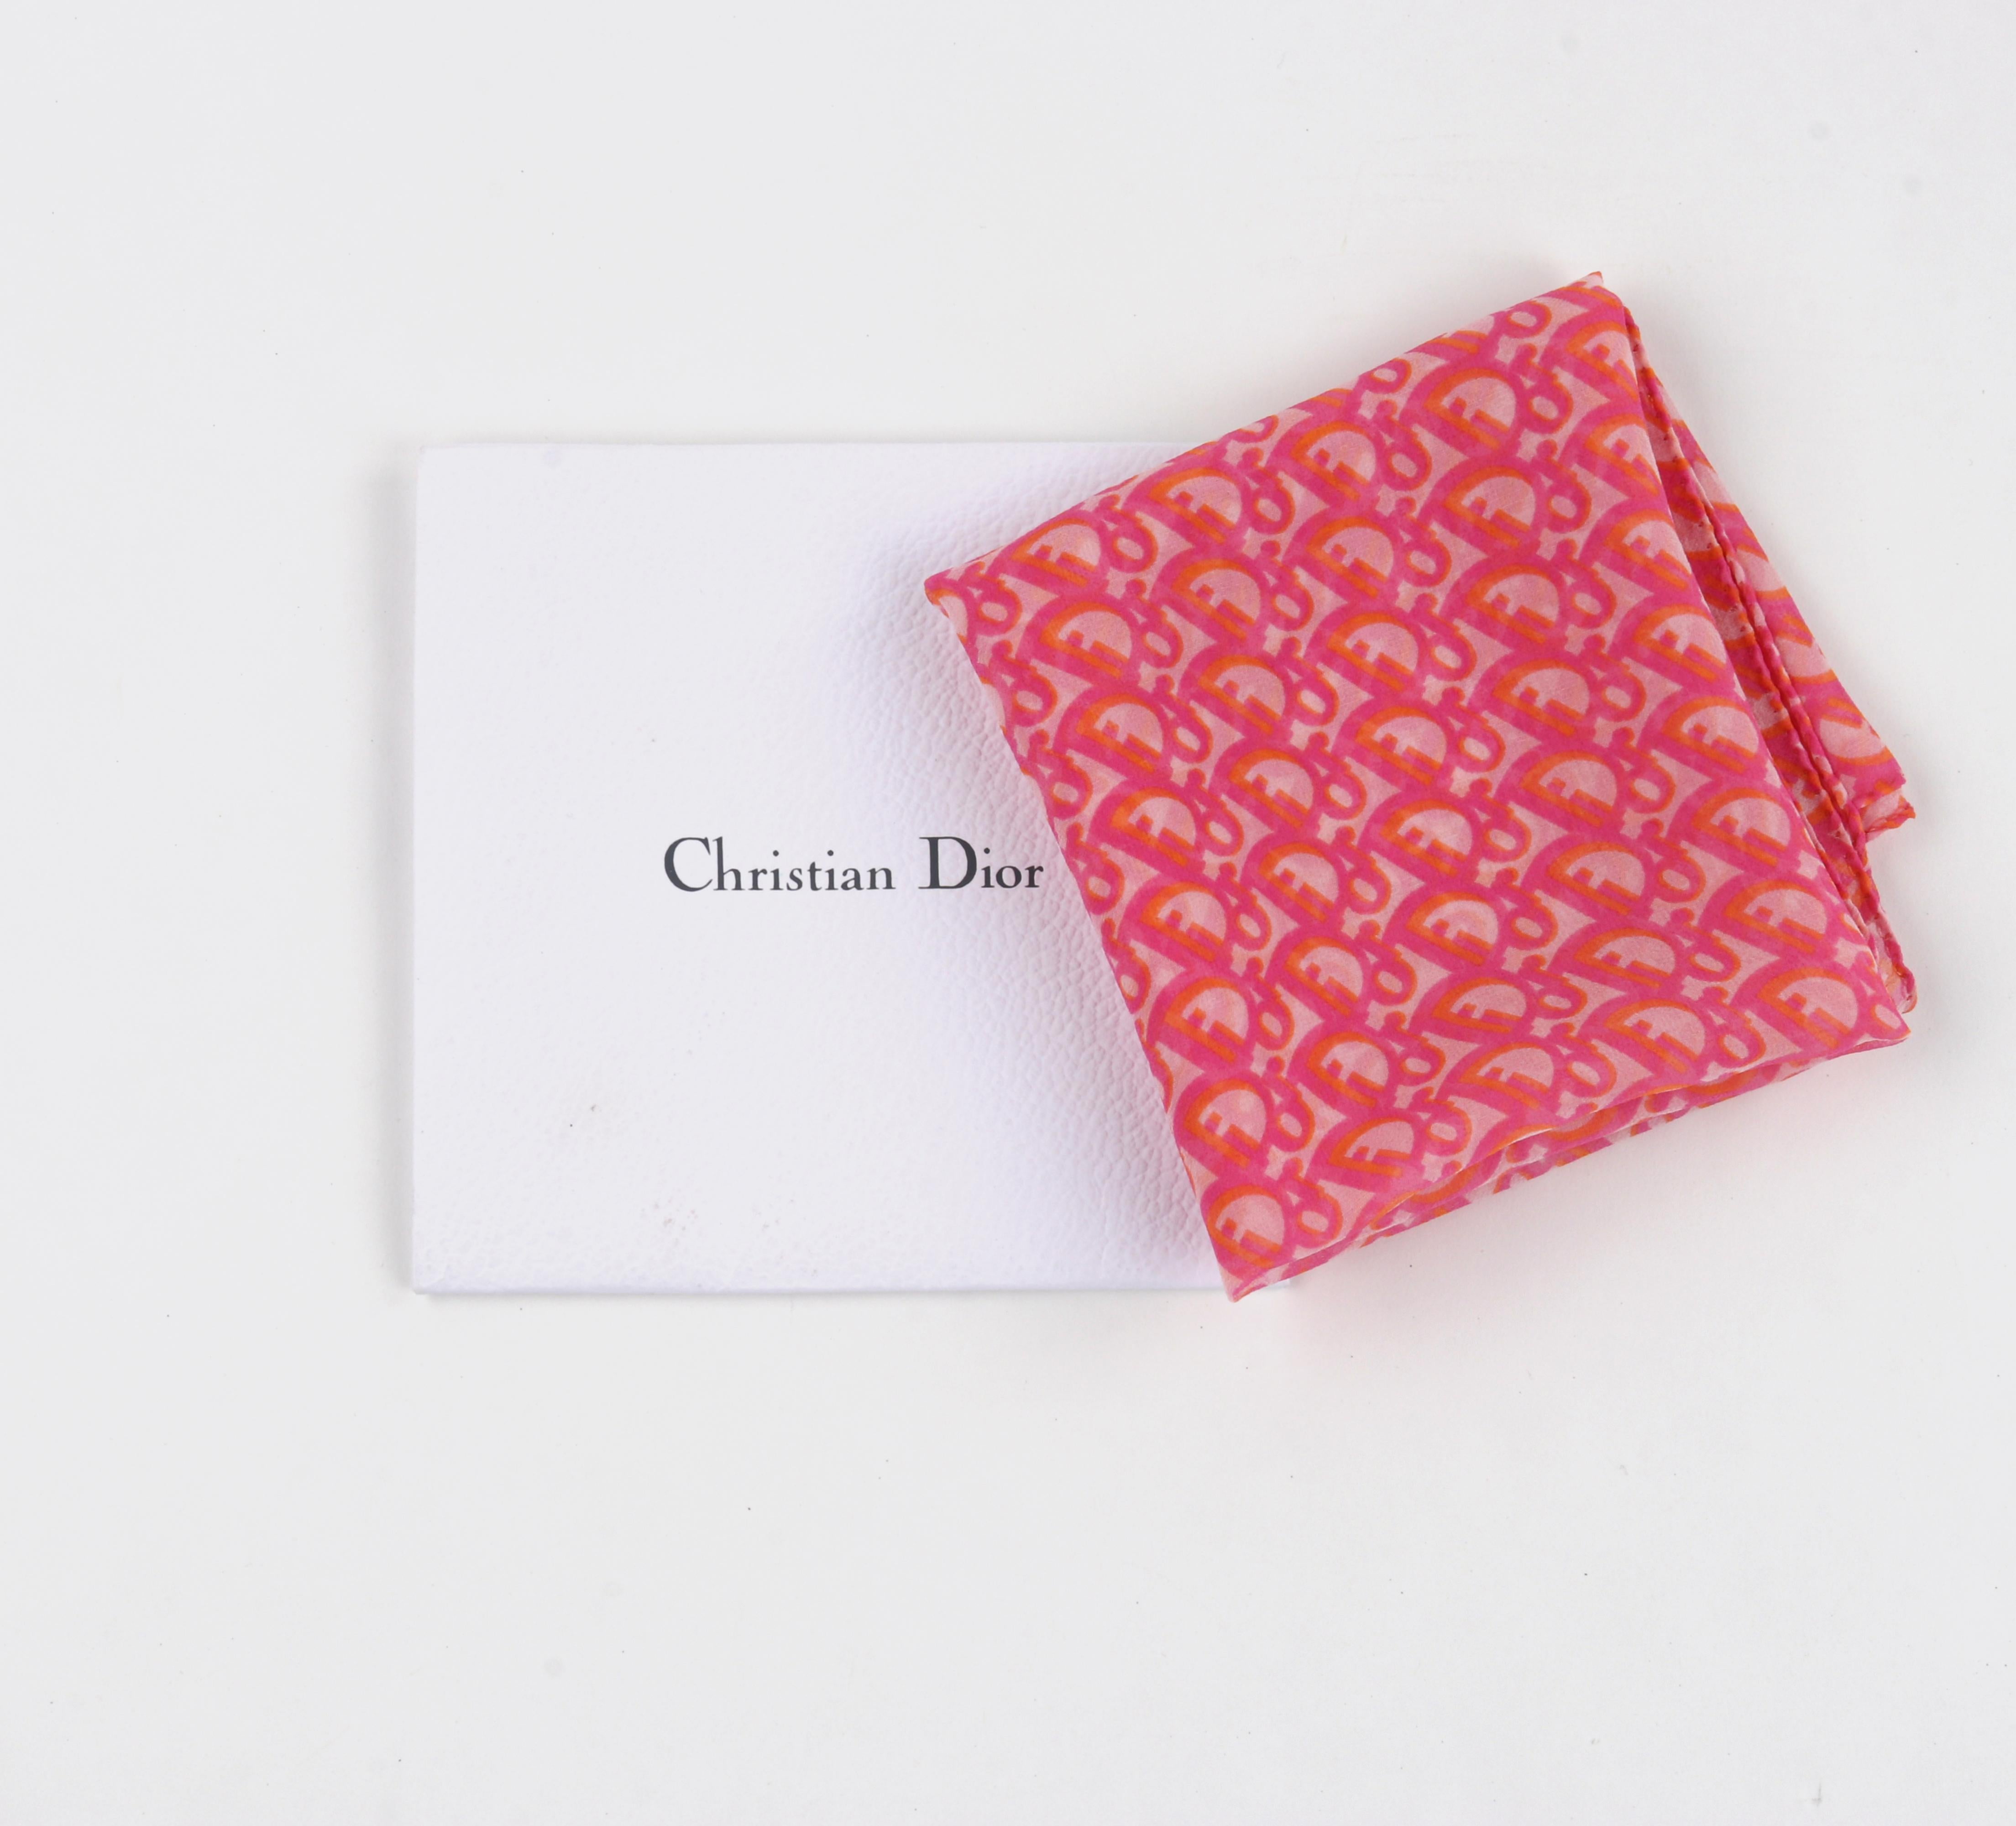 CHRISTIAN DIOR “Trotter” Pink & Orange Diorissimo Silk Chiffon Scarf w/ Envelope
 
Brand/Manufacturer: Christian Dior
Style: Square scarf
Color(s): “Rose”; Shades of pink, orange
Lined: No
Marked Fabric Content: “100% Silk”
Additional Details /